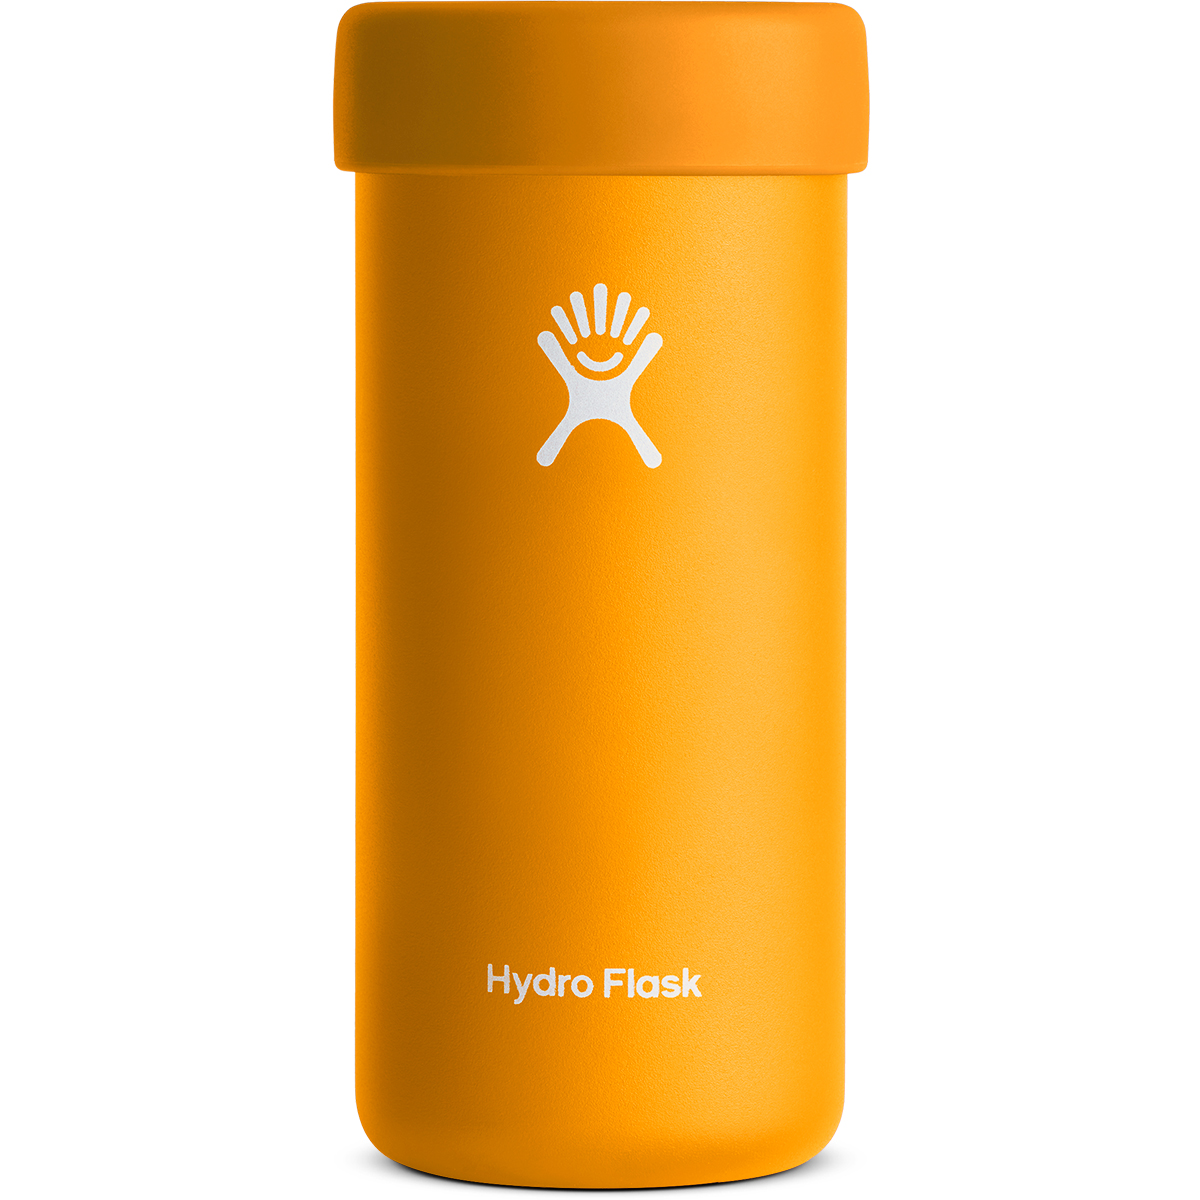 Hydro Flask Slim Cooler 12 Oz Cup